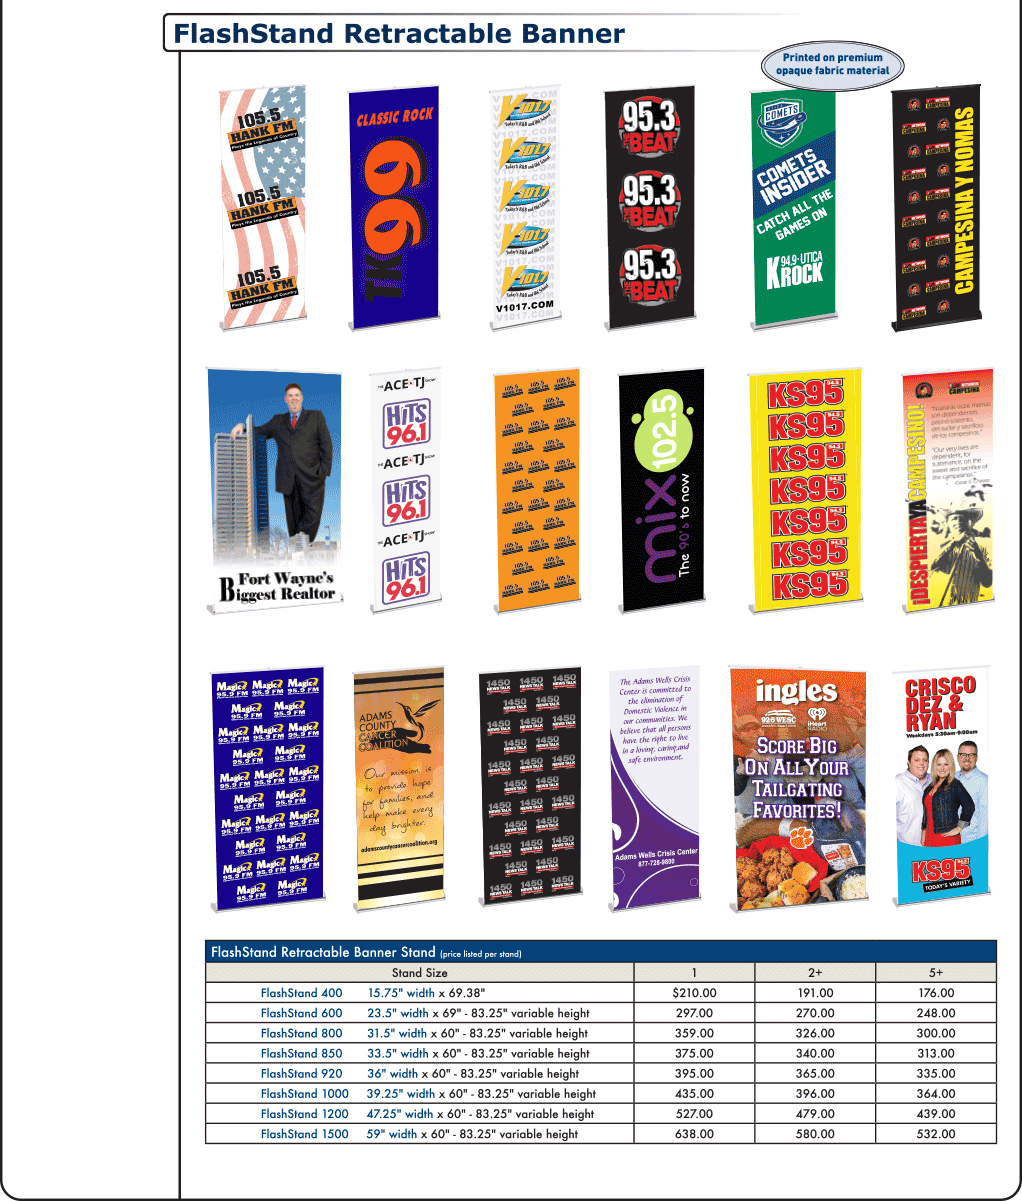 FlashStand Retractable Banner